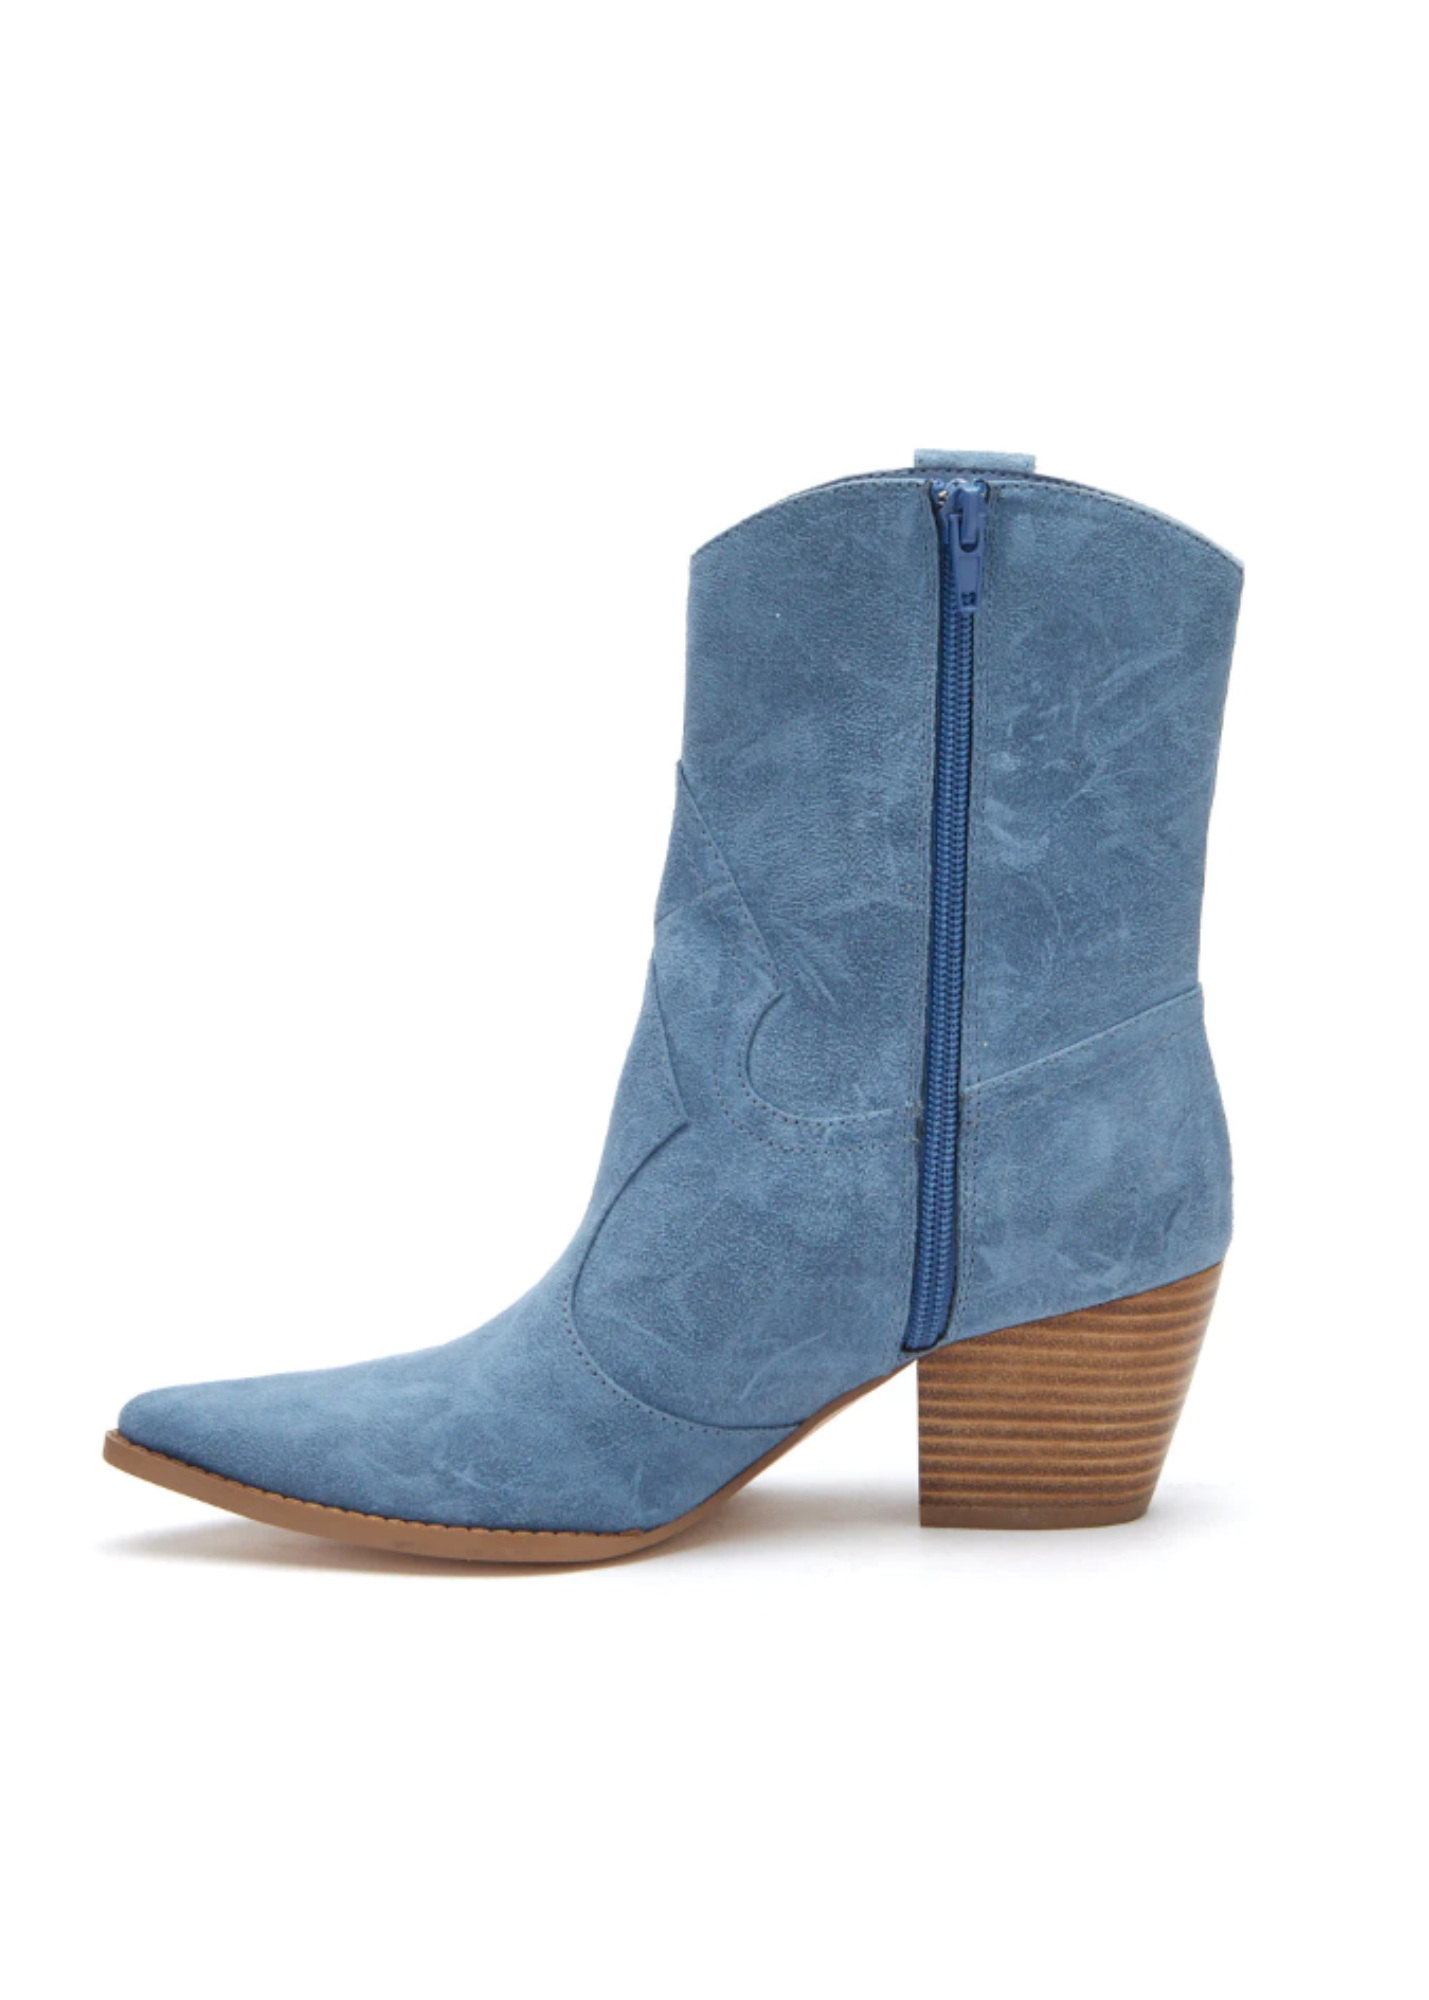 Bambi Ankle Boot in Blue Suede